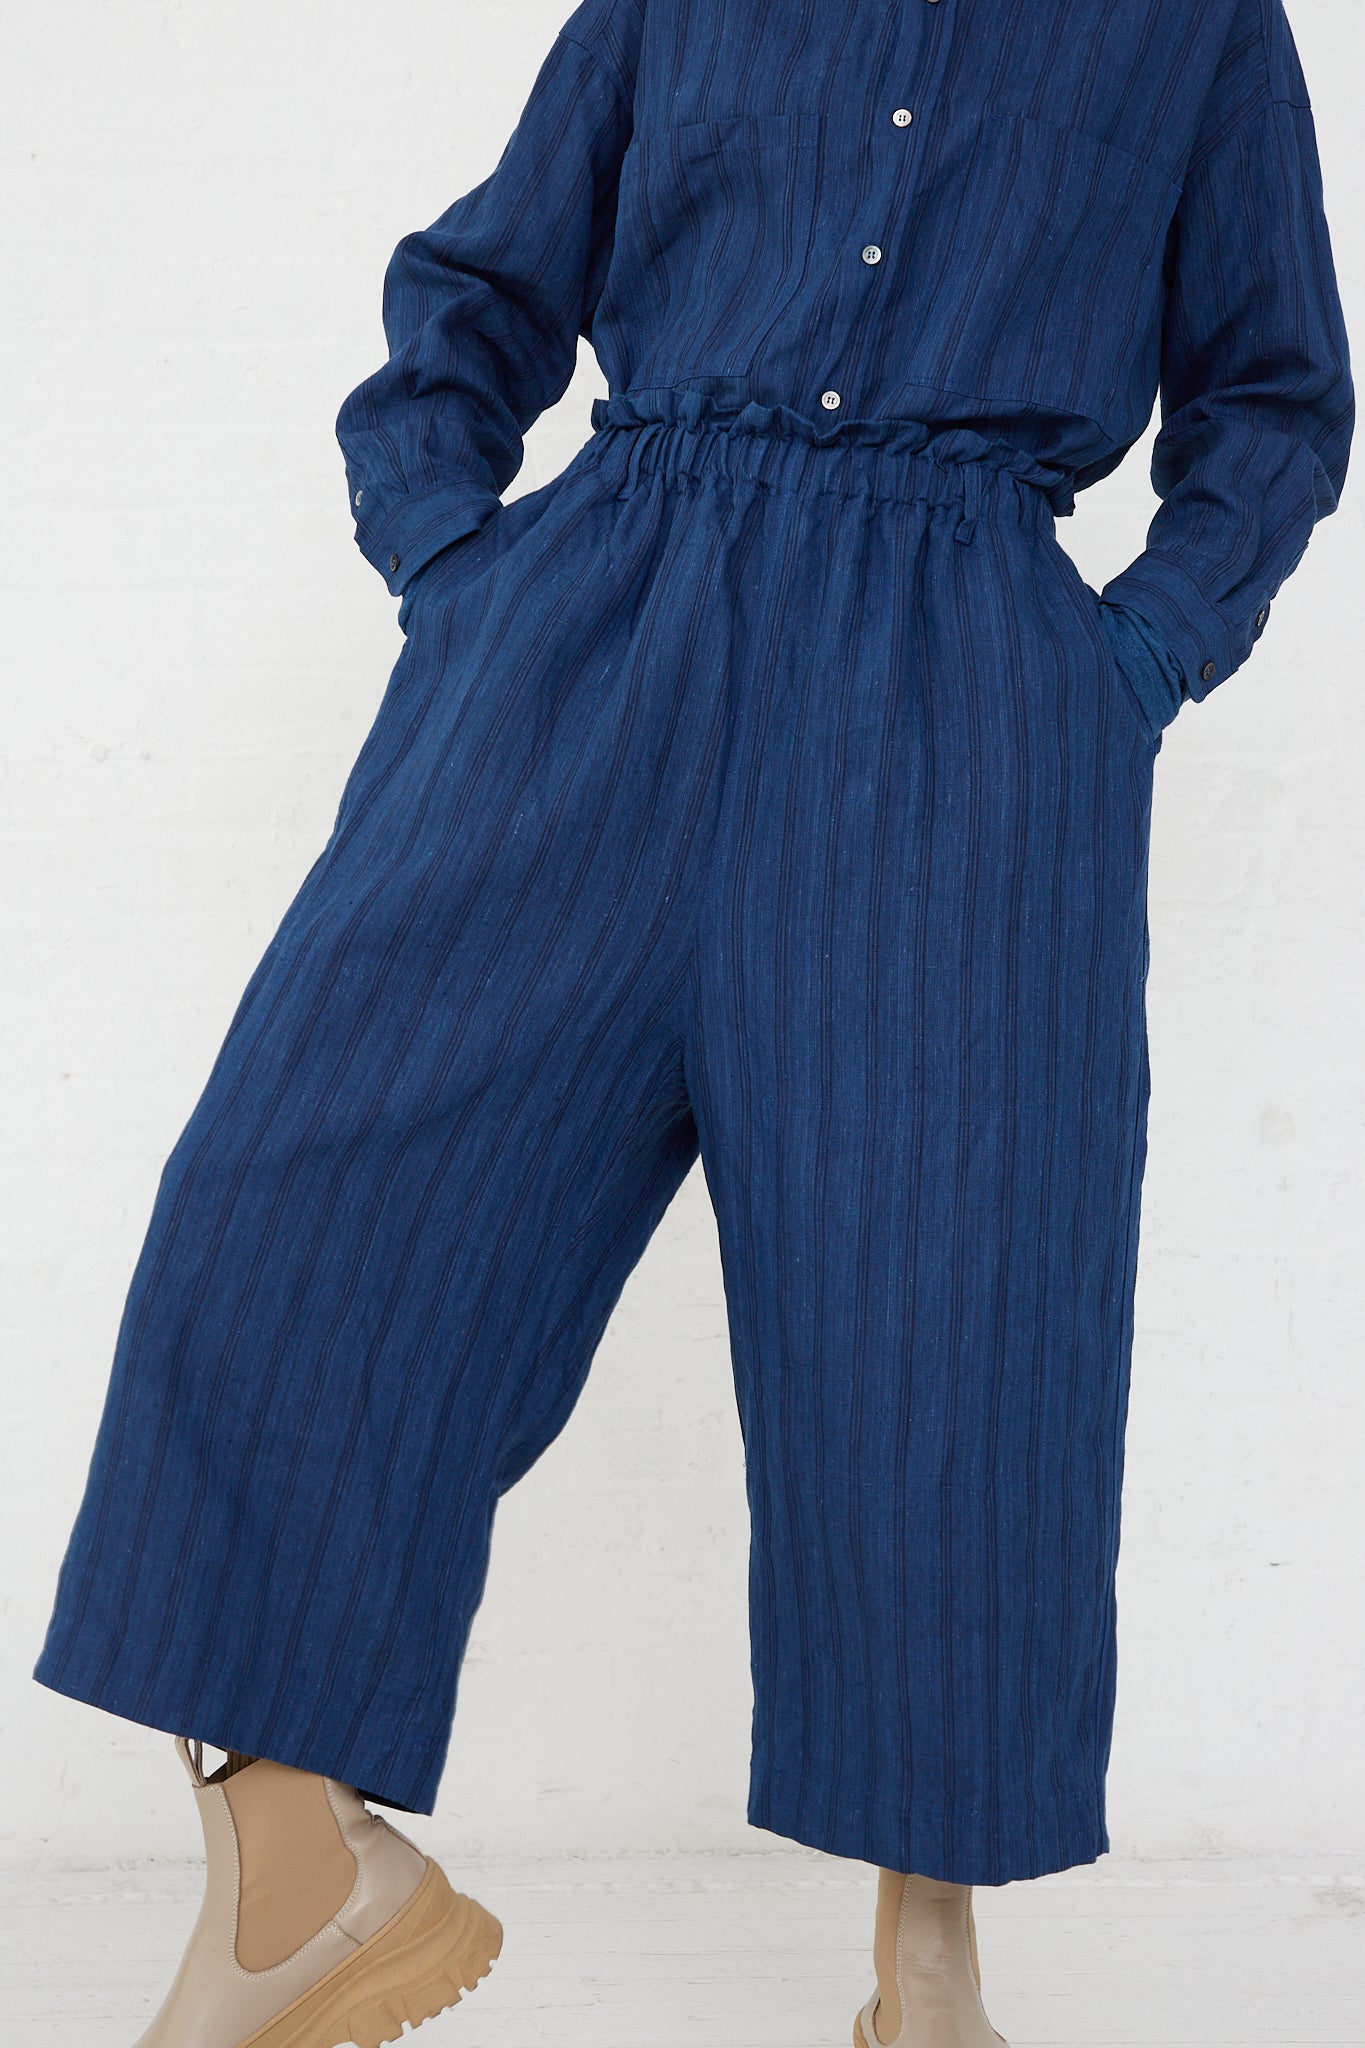 A woman wearing the Ichi Antiquités Woven Linen Pant in Indigo Stripes with an elasticated waist.